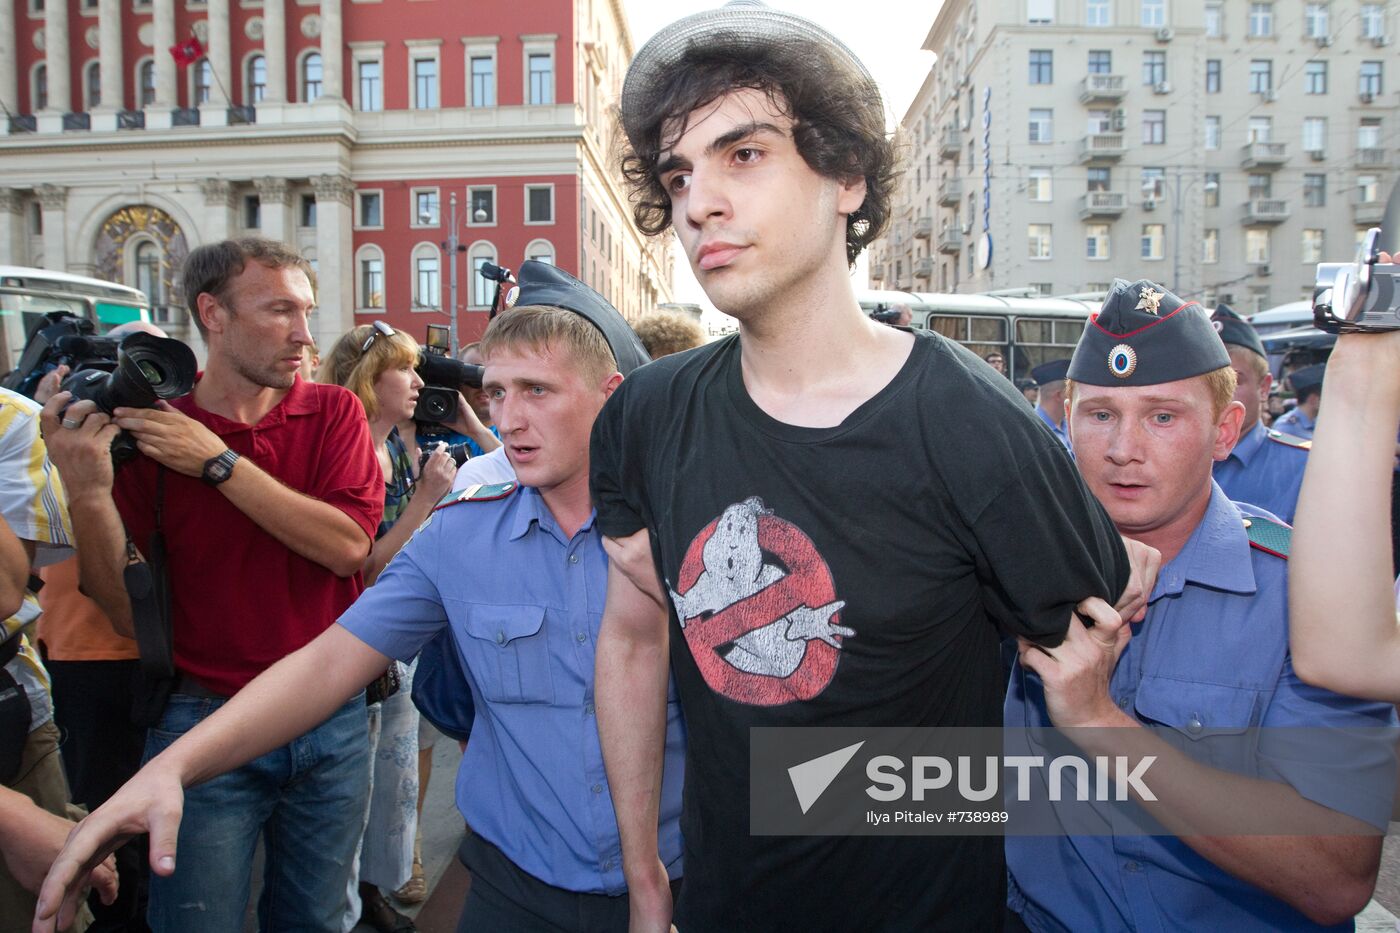 Activists stage Day of Wrath rally in Moscow